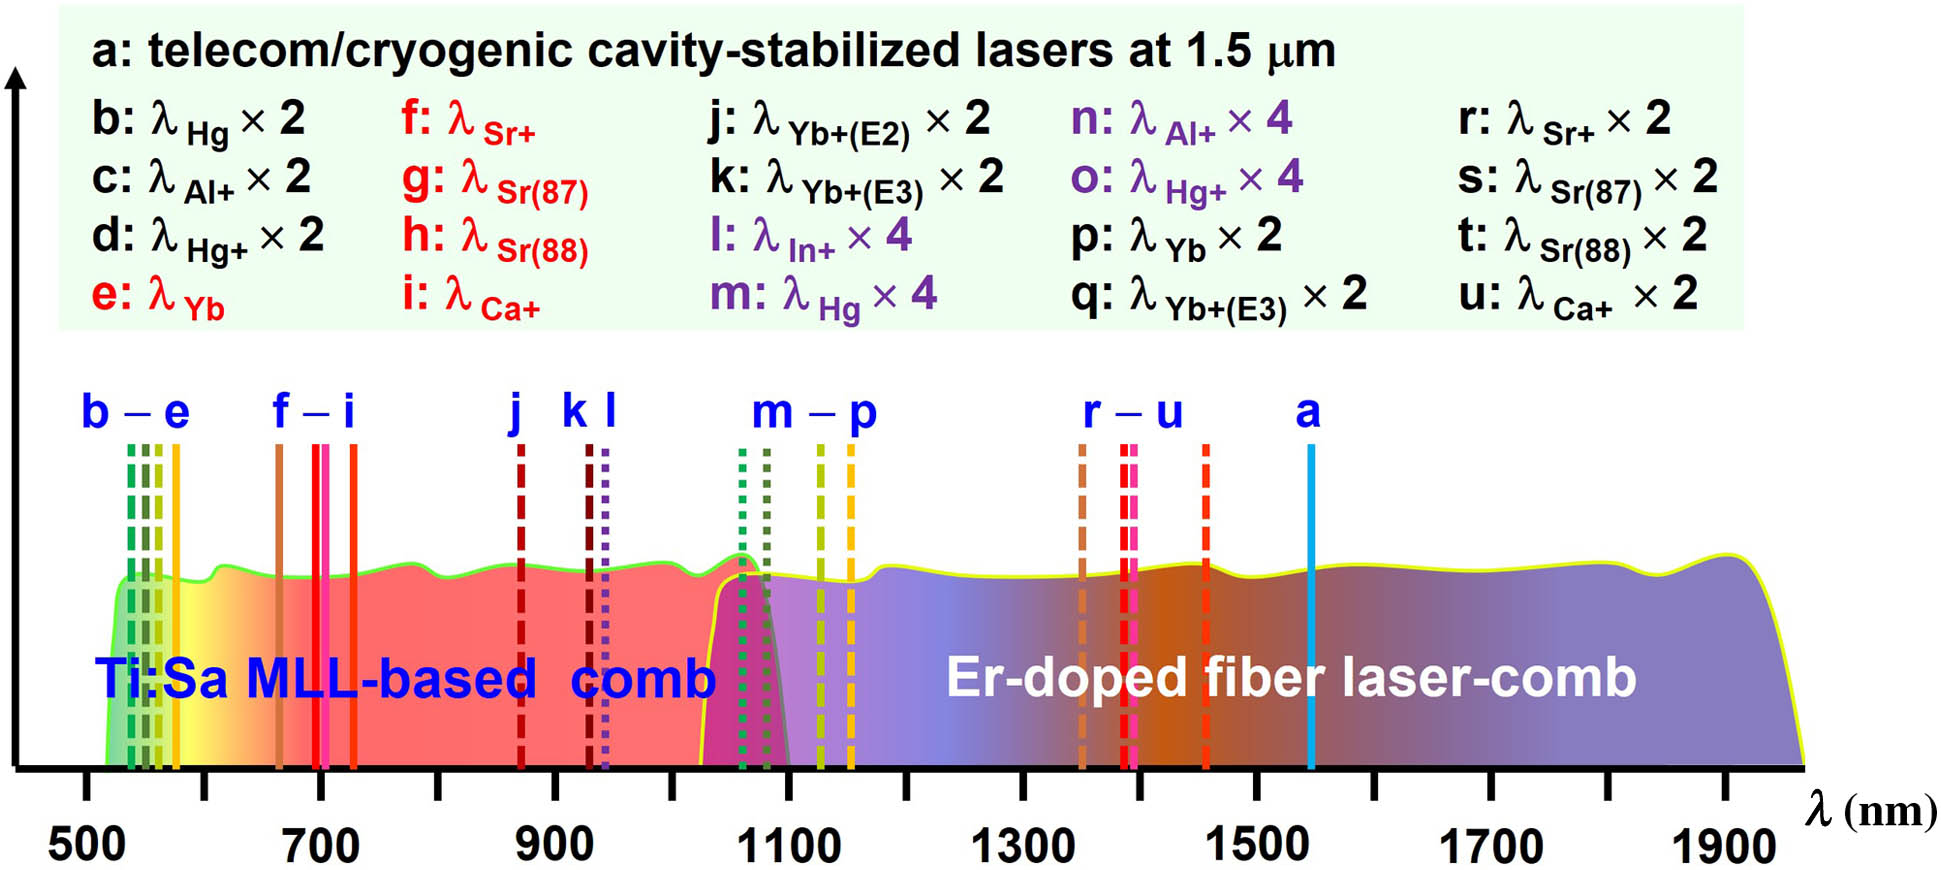 Typical spectra of Ti:Sa MLL-based combs, Er-doped fiber laser-based combs, optical atomic clocks, and 1.5 μm fiber telecom band. Solid lines indicate the fundamental wavelength of optical atomic clocks; the dashed (dotted) lines represent 2× (4×) the wavelength of optical atomic clocks.